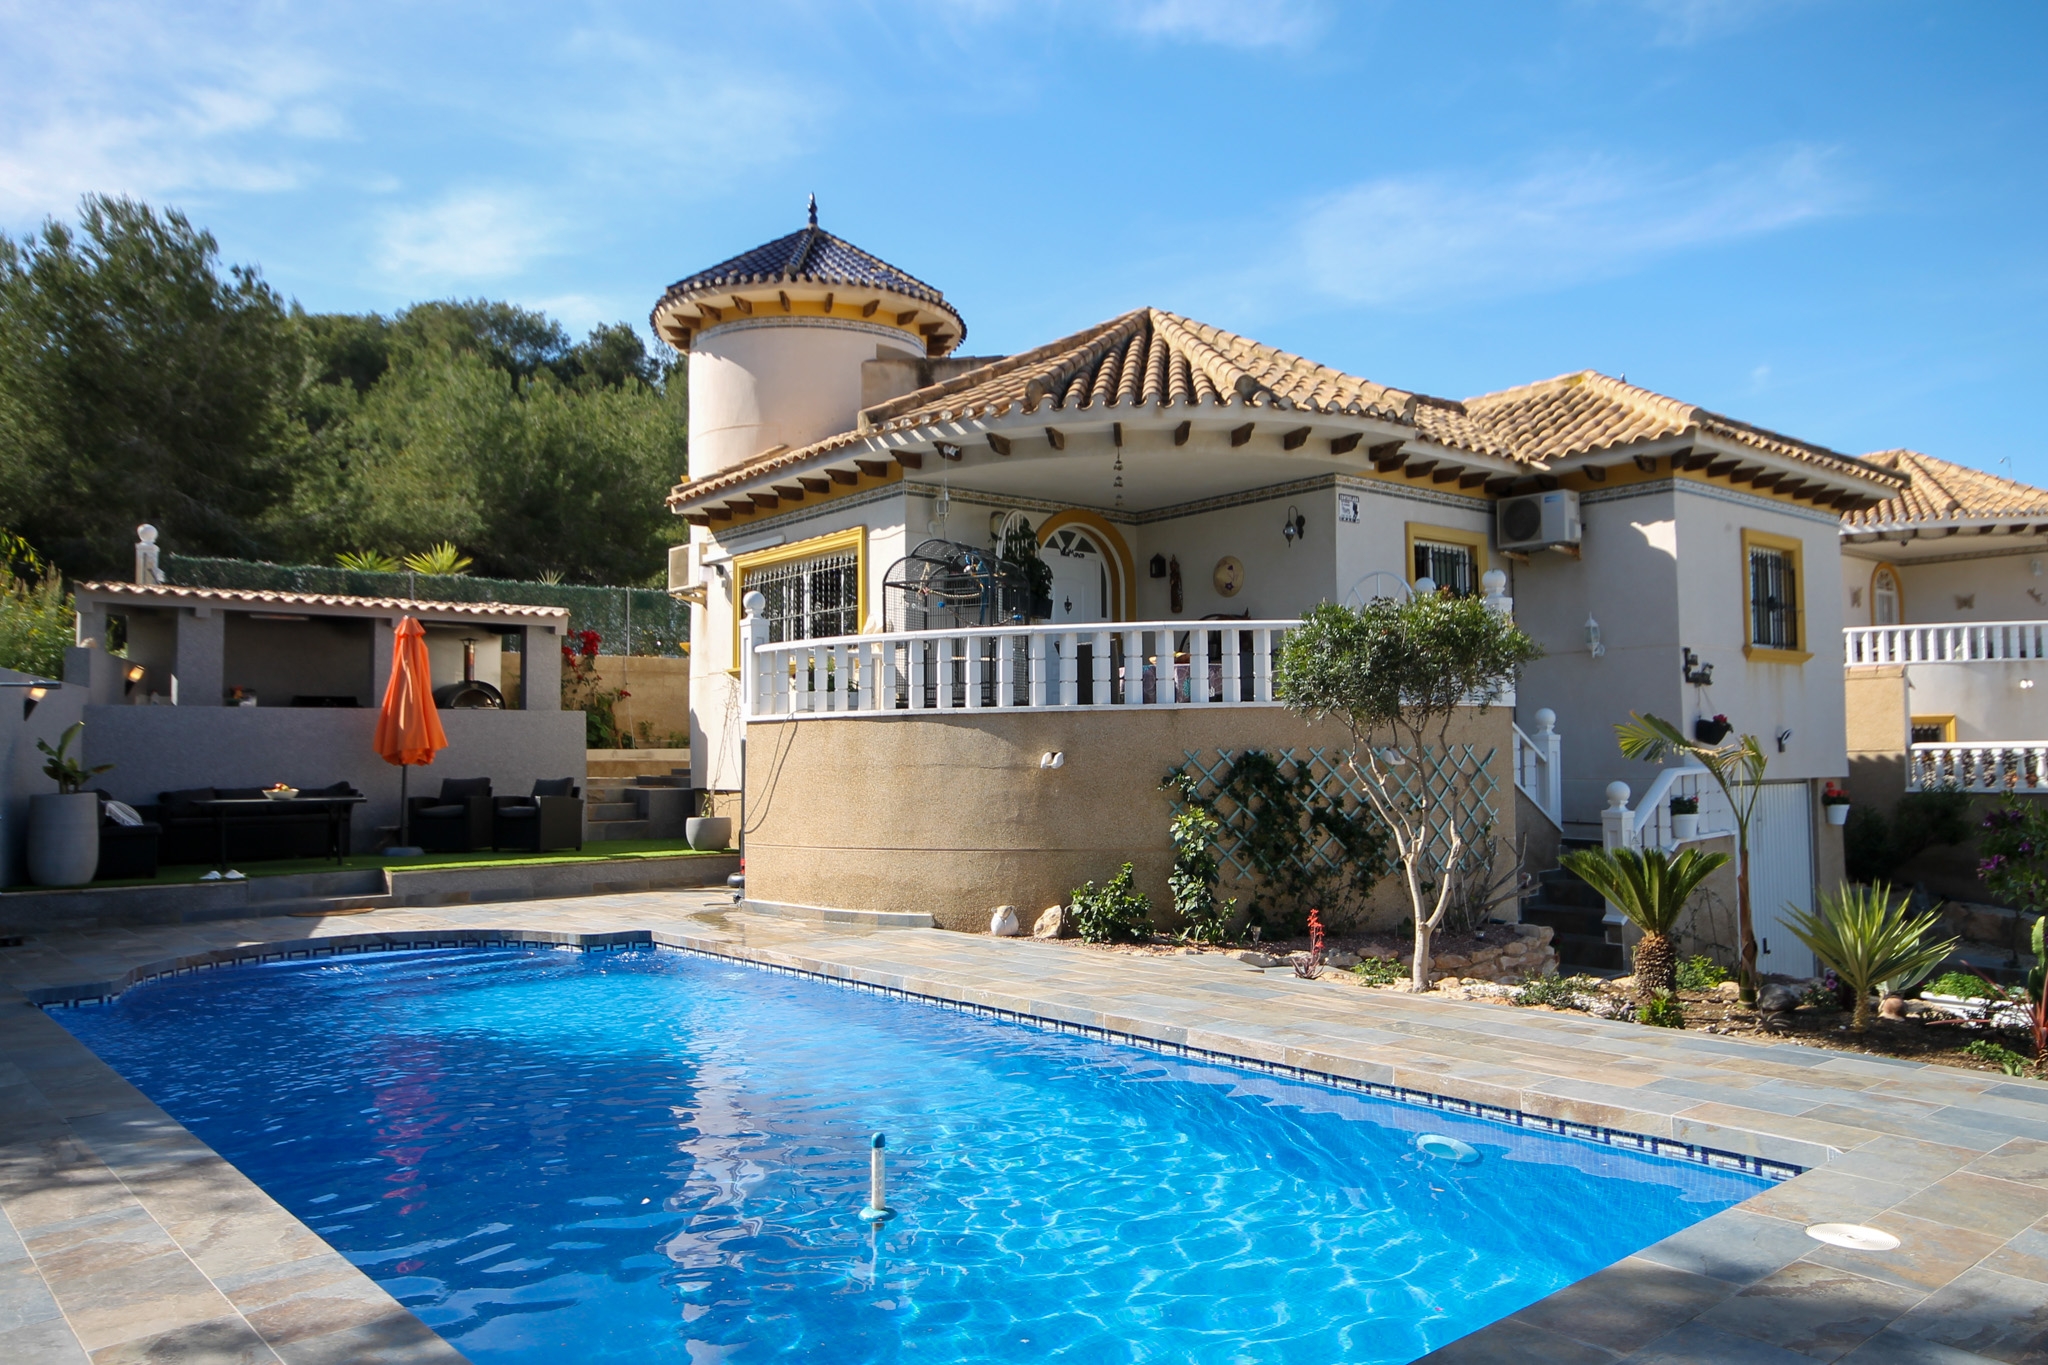 3 Bed detached villa by the golf course with private pool